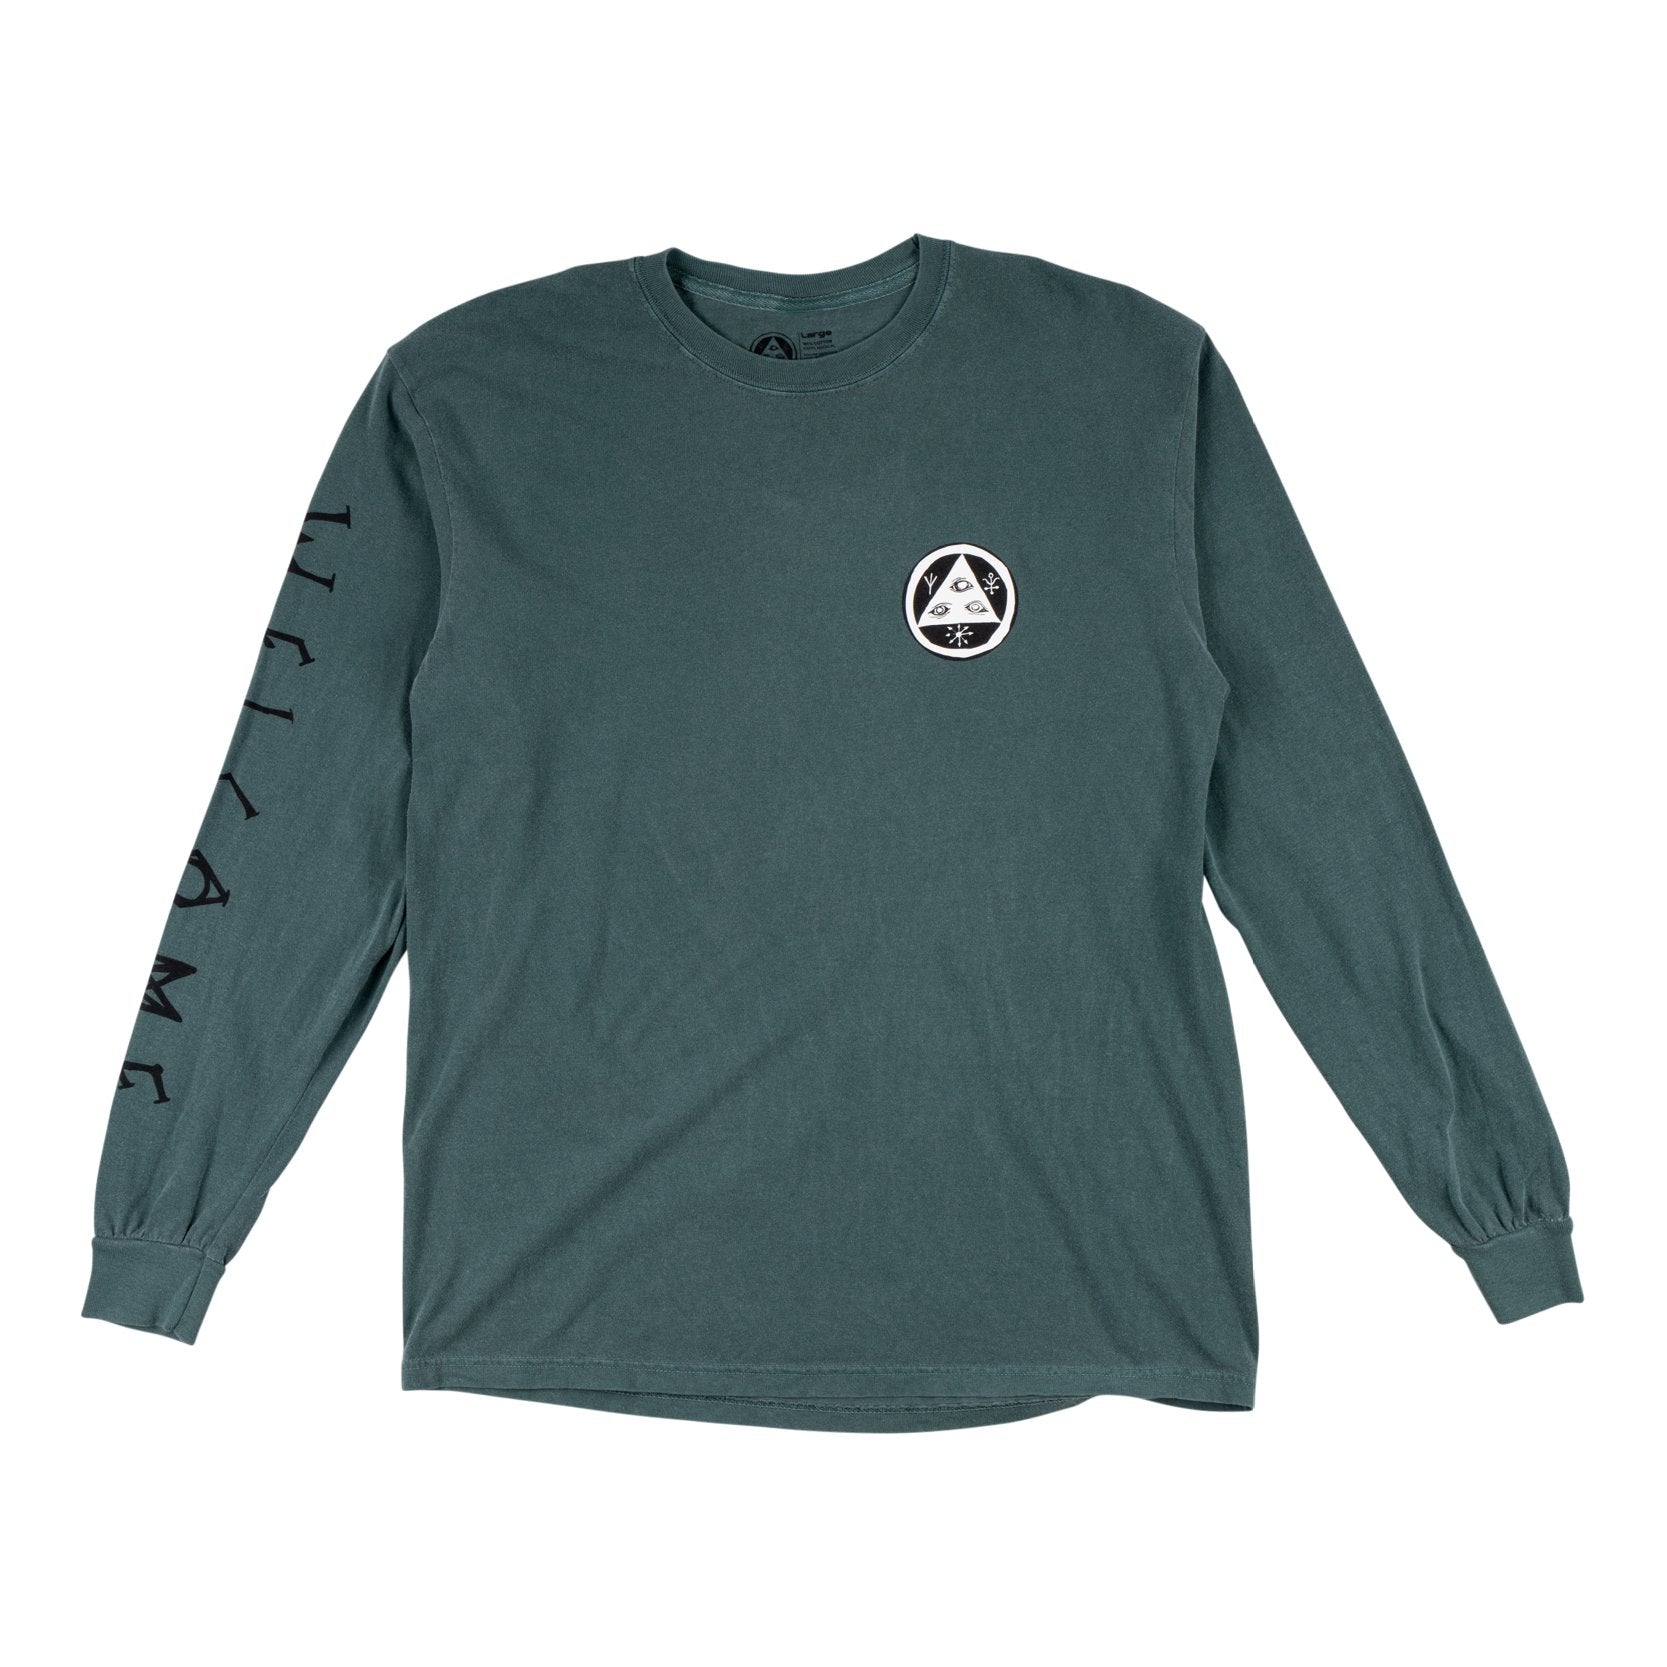 Dyed Spruce Sloth Welcome Long Sleeve T-Shirt